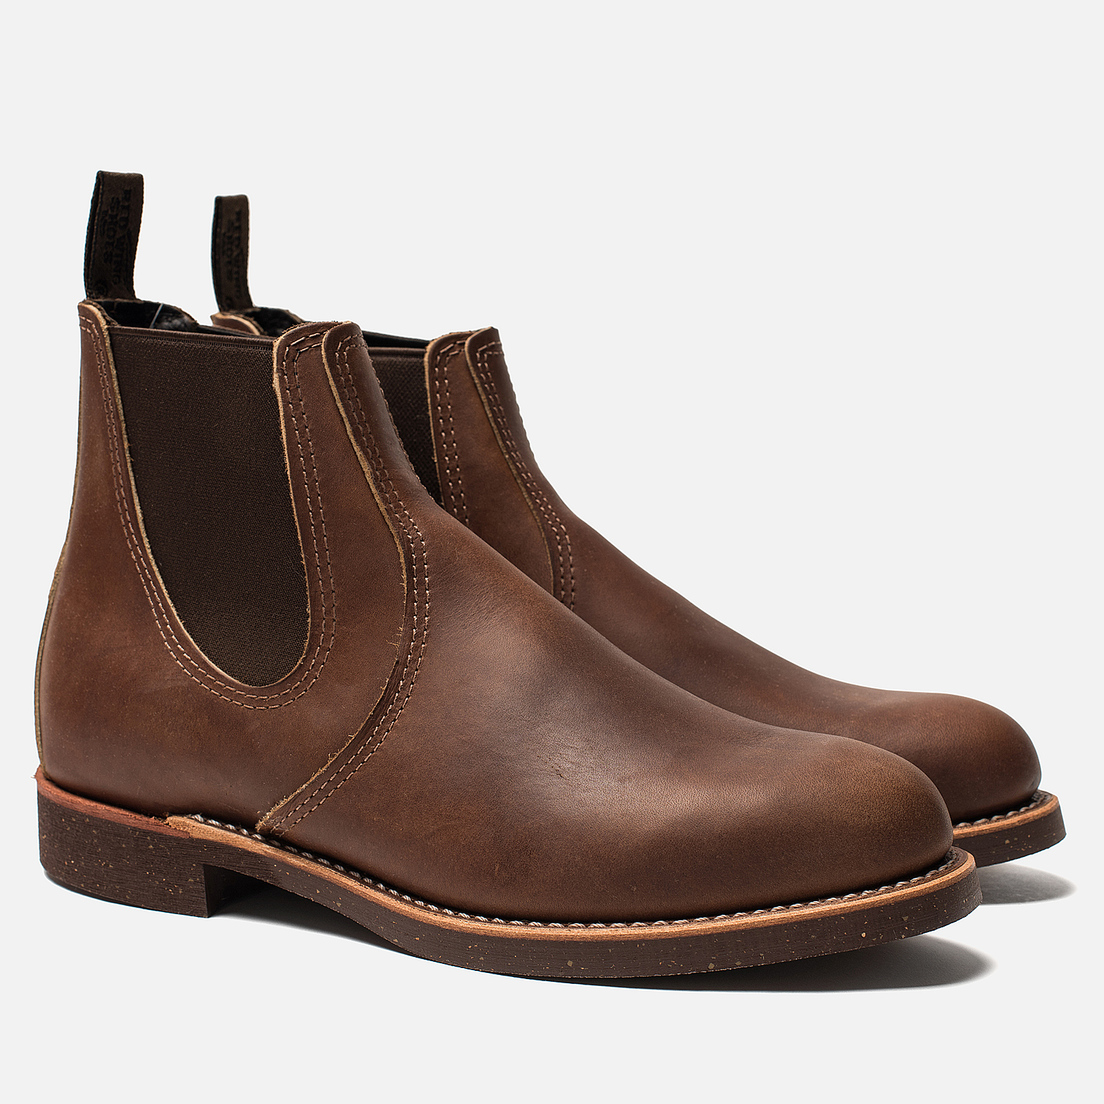 Red Wing Shoes Мужские ботинки 8201 Chelsea Rancher Leather